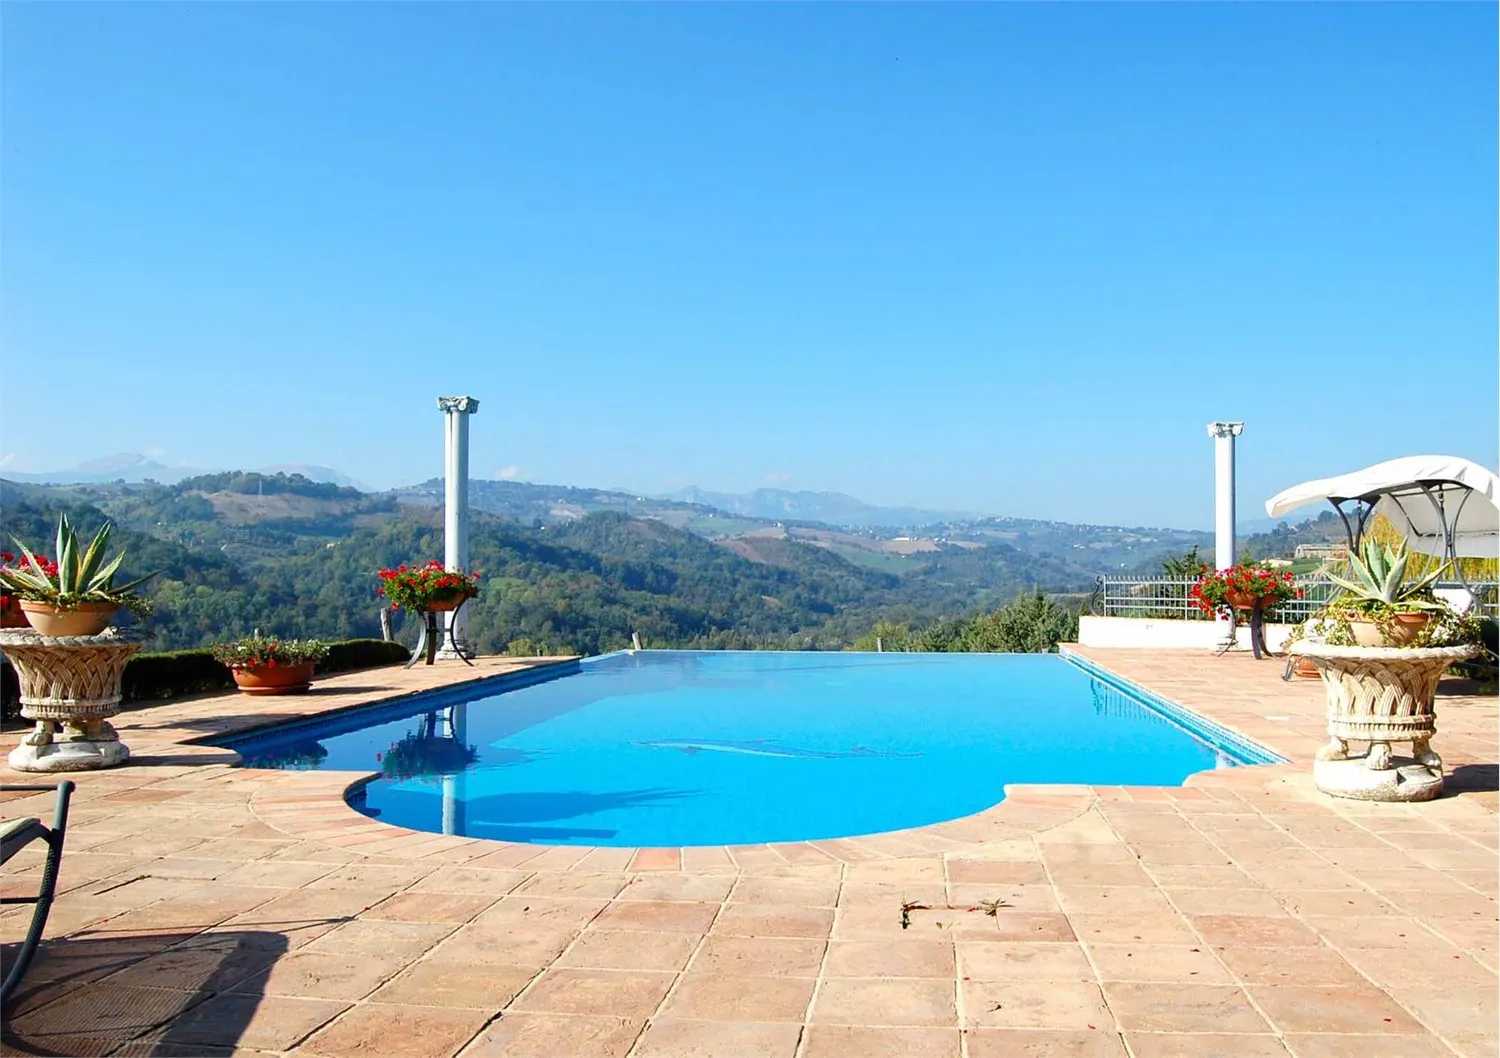 Residential in Penna San Giovanni, Marche 10811614